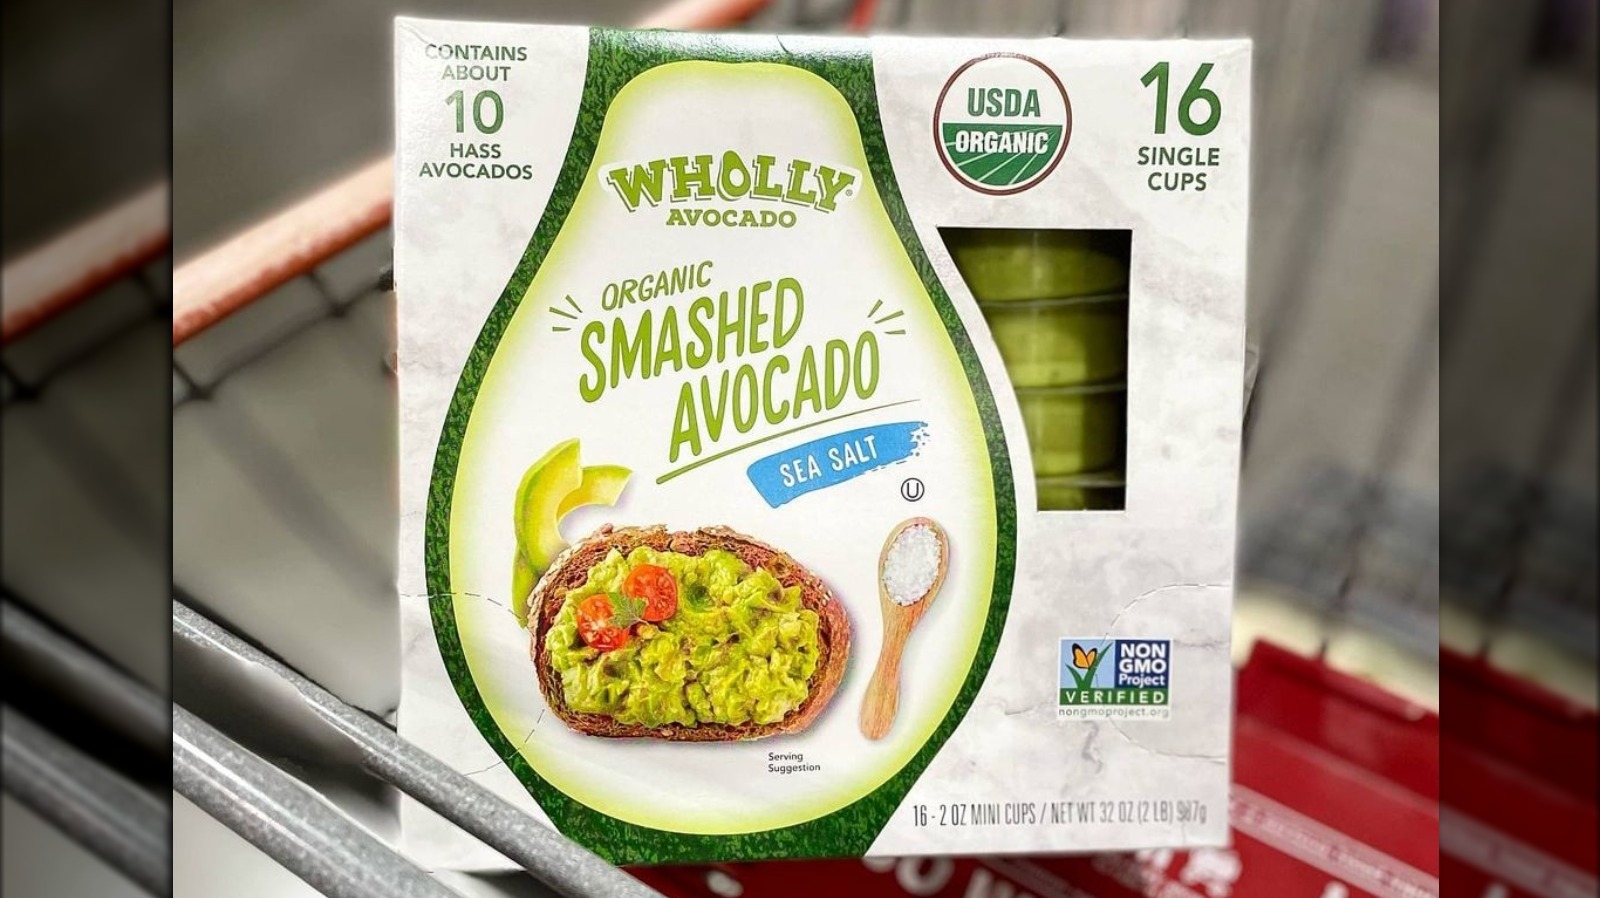 https://www.mashed.com/img/gallery/this-smashed-avocado-from-costco-makes-meal-prep-a-snap/l-intro-1609867889.jpg